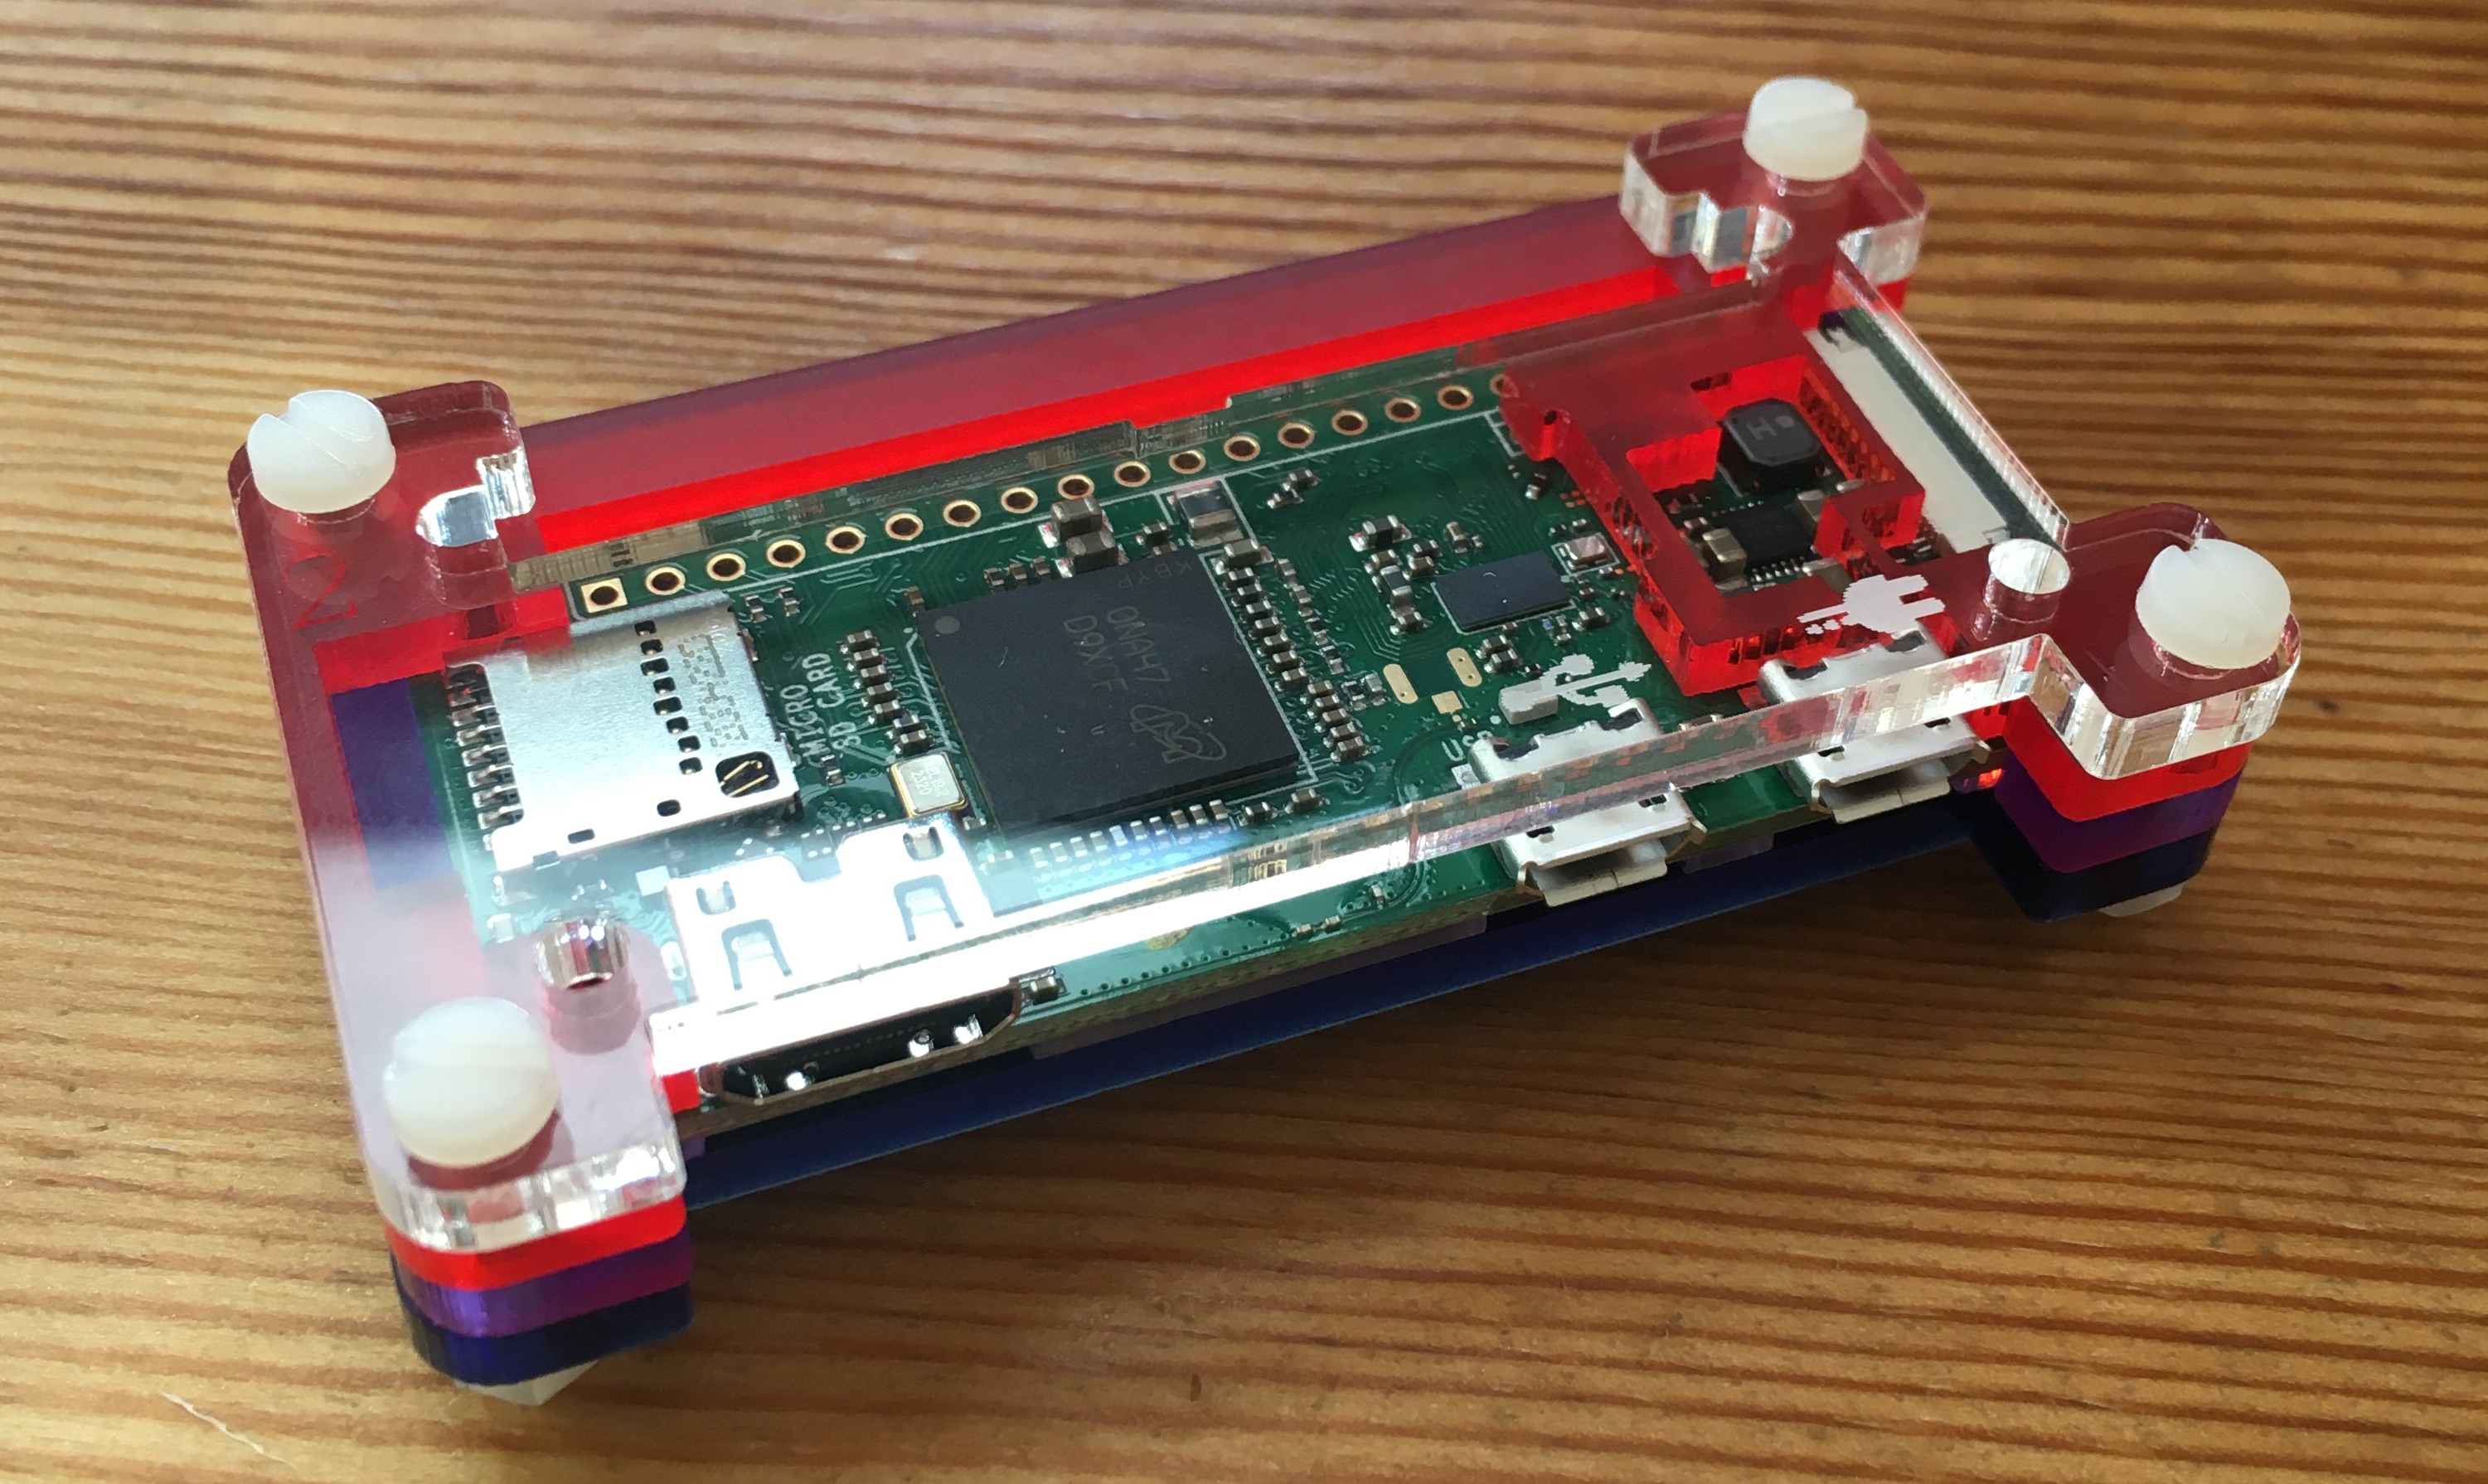 Connecting a headless Raspberry Pi to University of Arizona wifi (and fixing time)